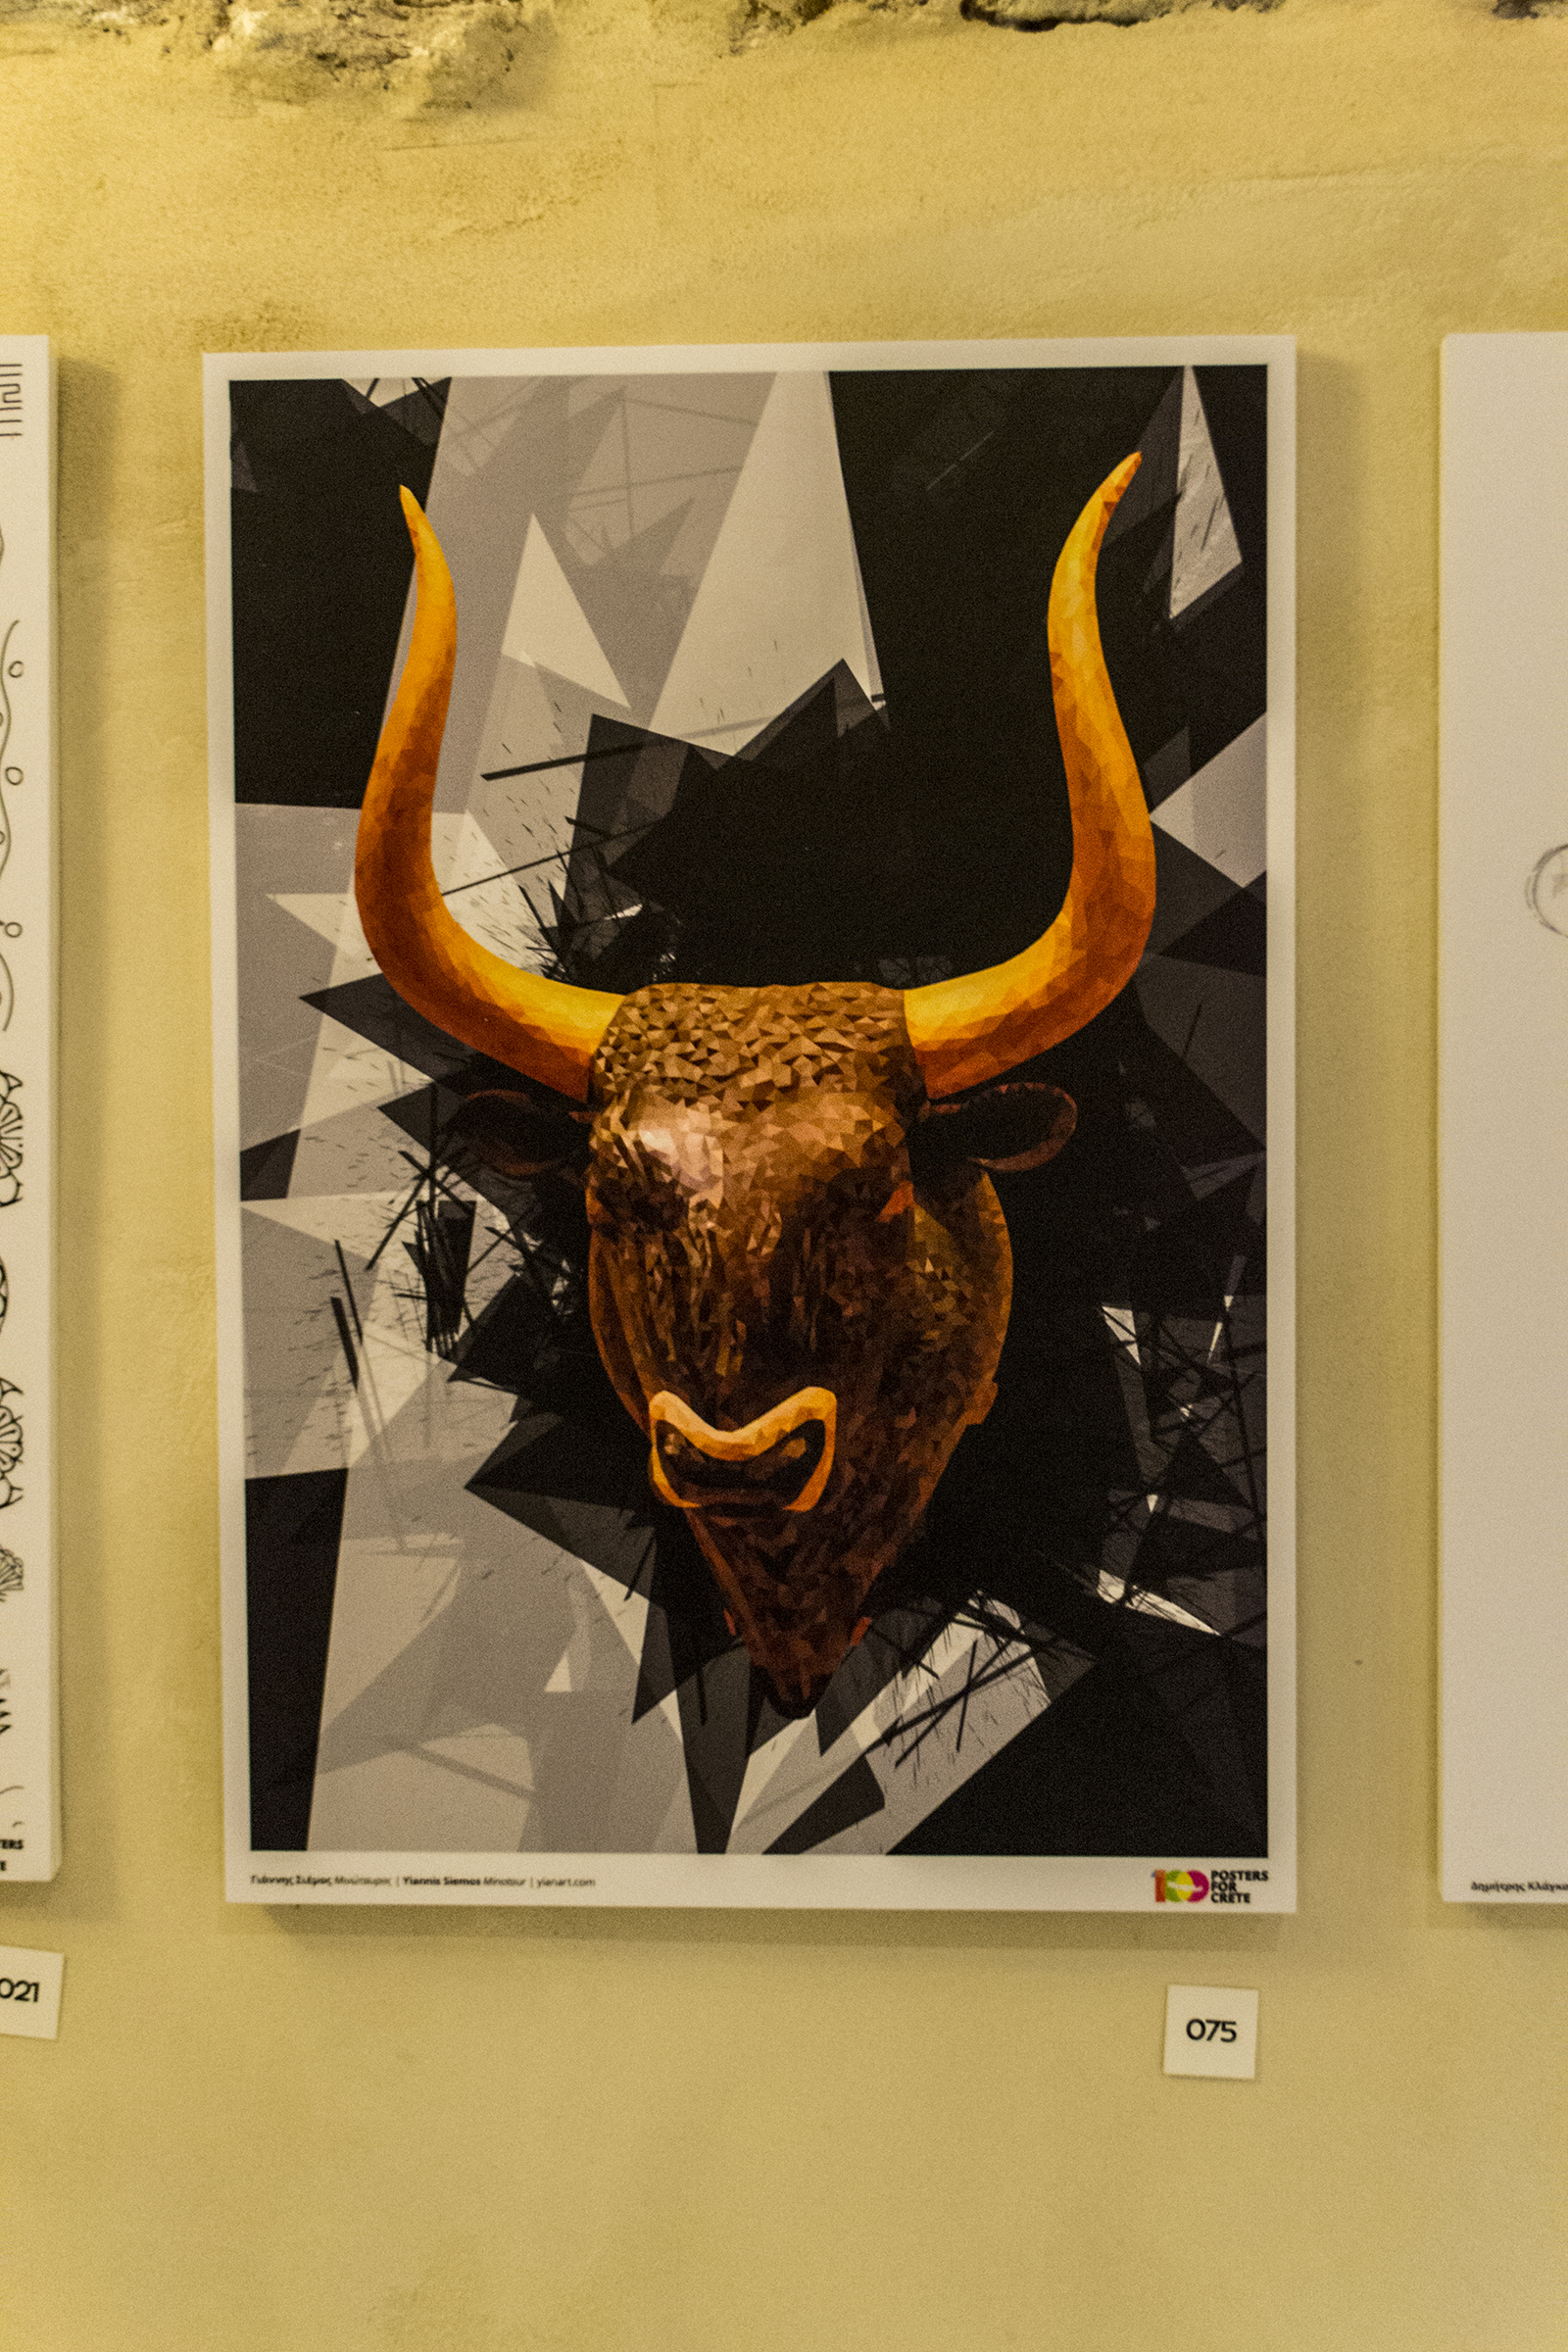 Minotaur_100 posters for Crete_Exhibition Poster_Siemos Yiannis_yianart.com